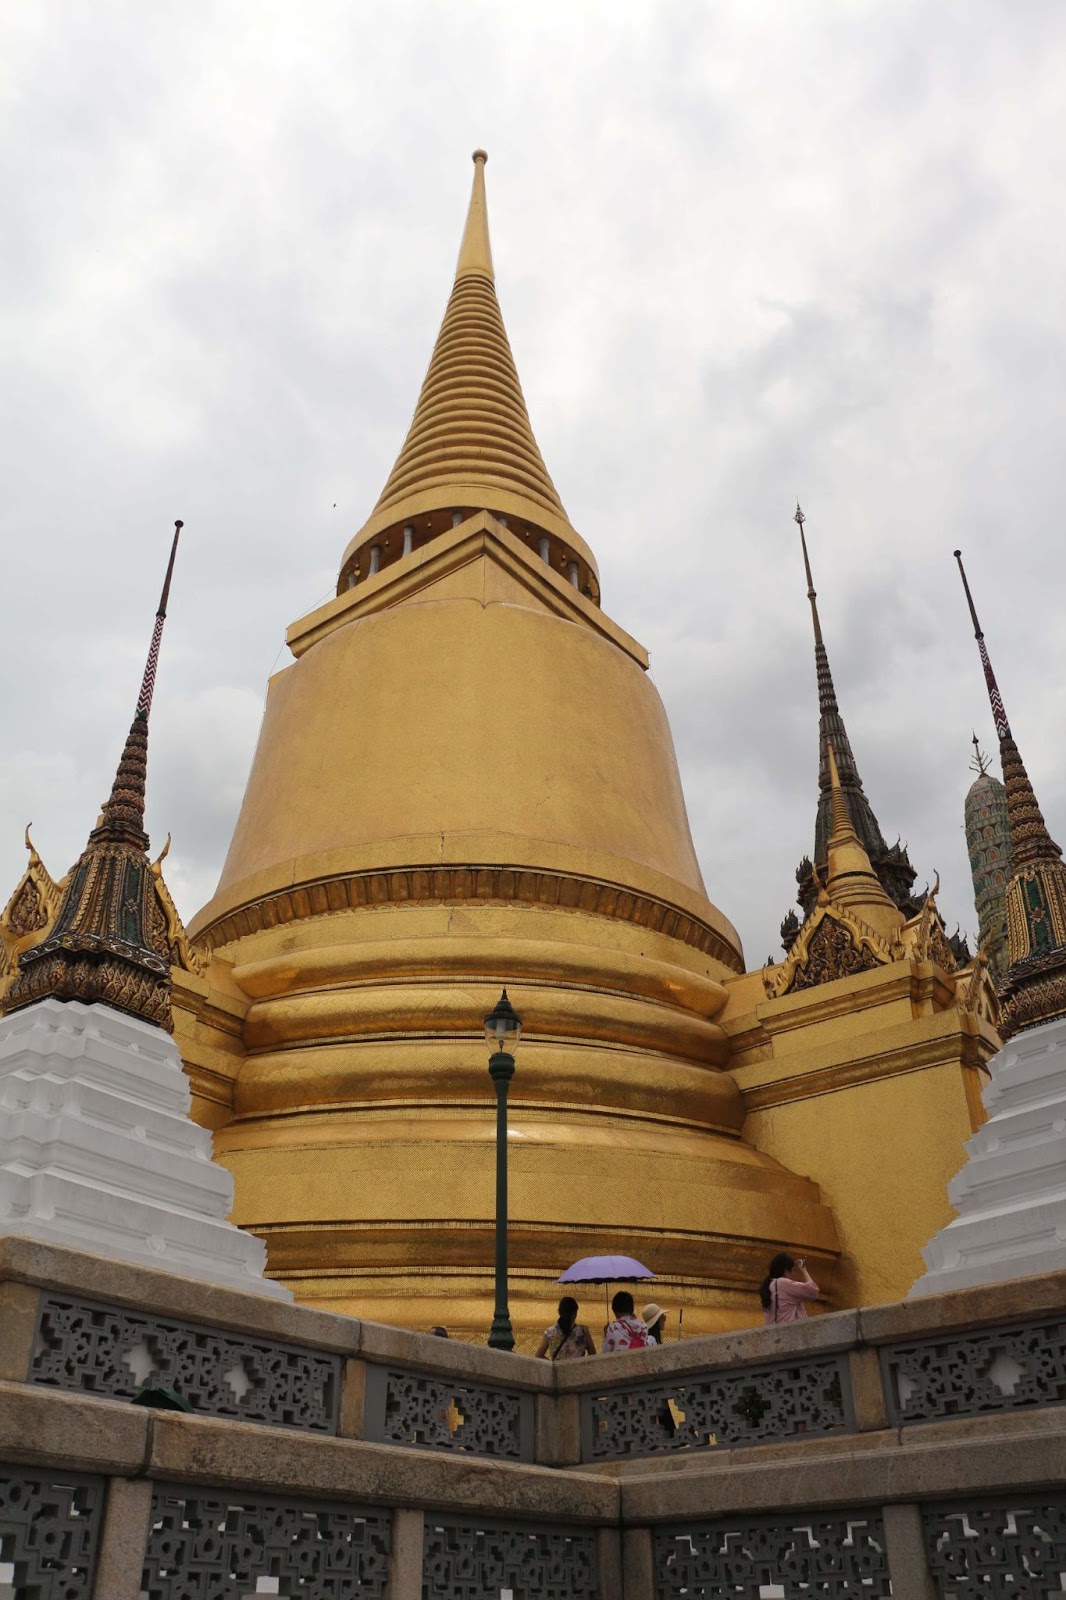 24 hours in Bangkok, Phra Siratana Chedi is a golden stupa erected by King Rama IV to house the relics of Buddha from Sri Lanka